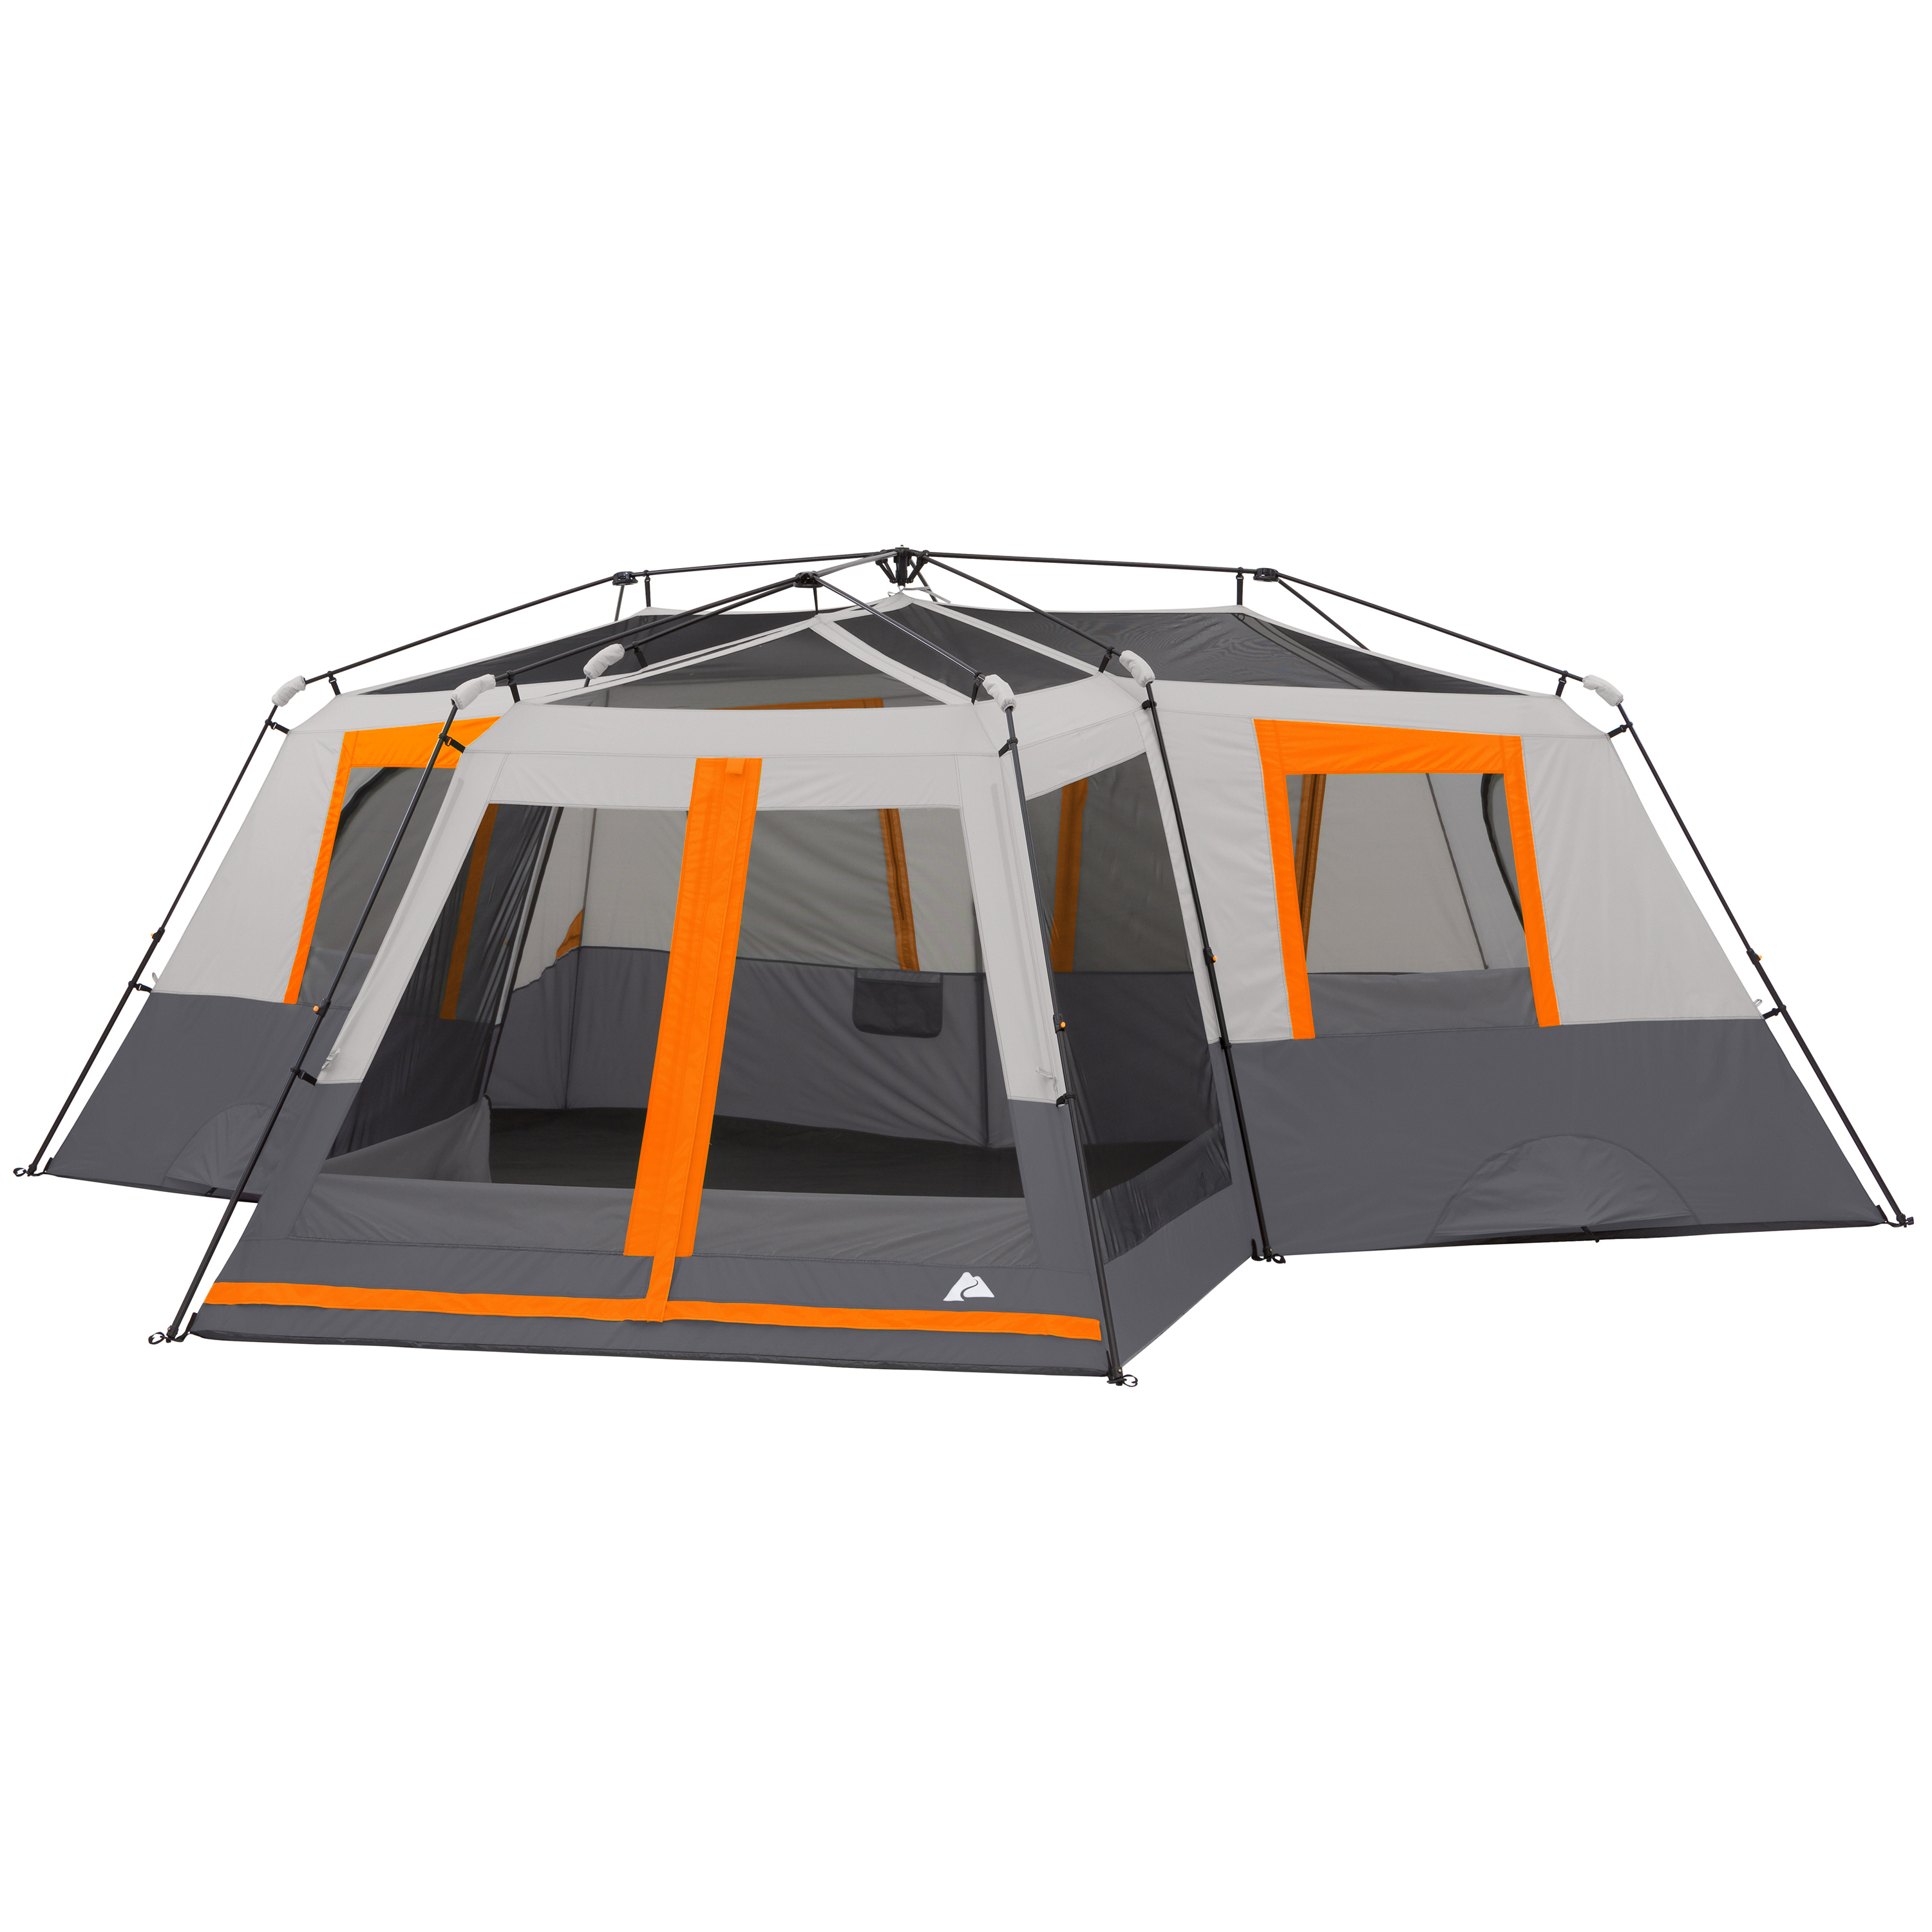 Ozark Trail 20' x 18' 12-Person 3-Room Instant Cabin Tent with Screen Room, 56.5 lbs - image 2 of 12